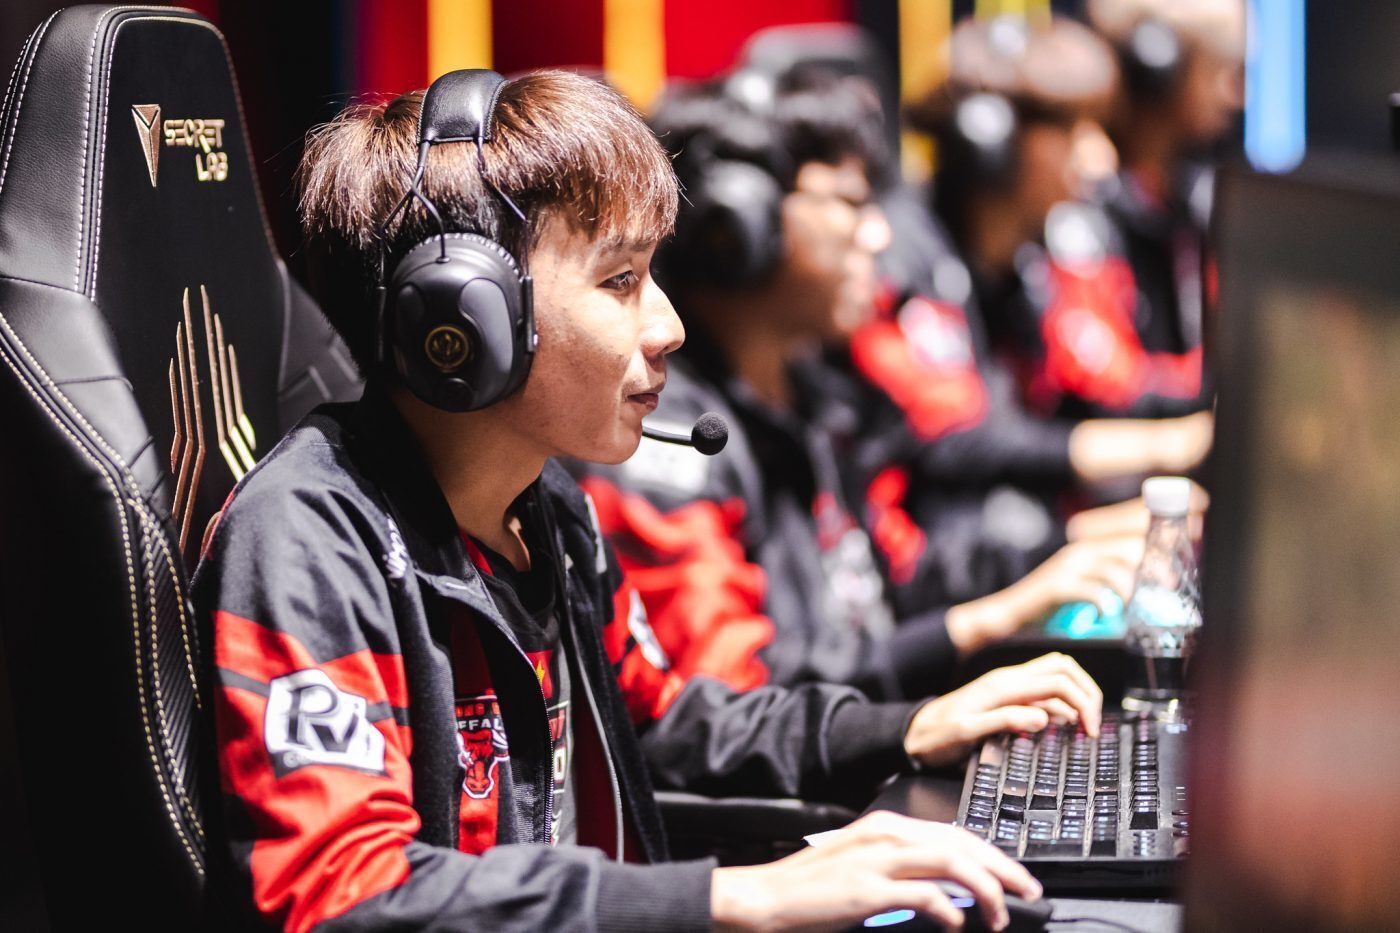 Phong Vũ Buffalo have their work cut out for them in the group stage of MSI 2019. (Photo by David Lee/Riot Games)